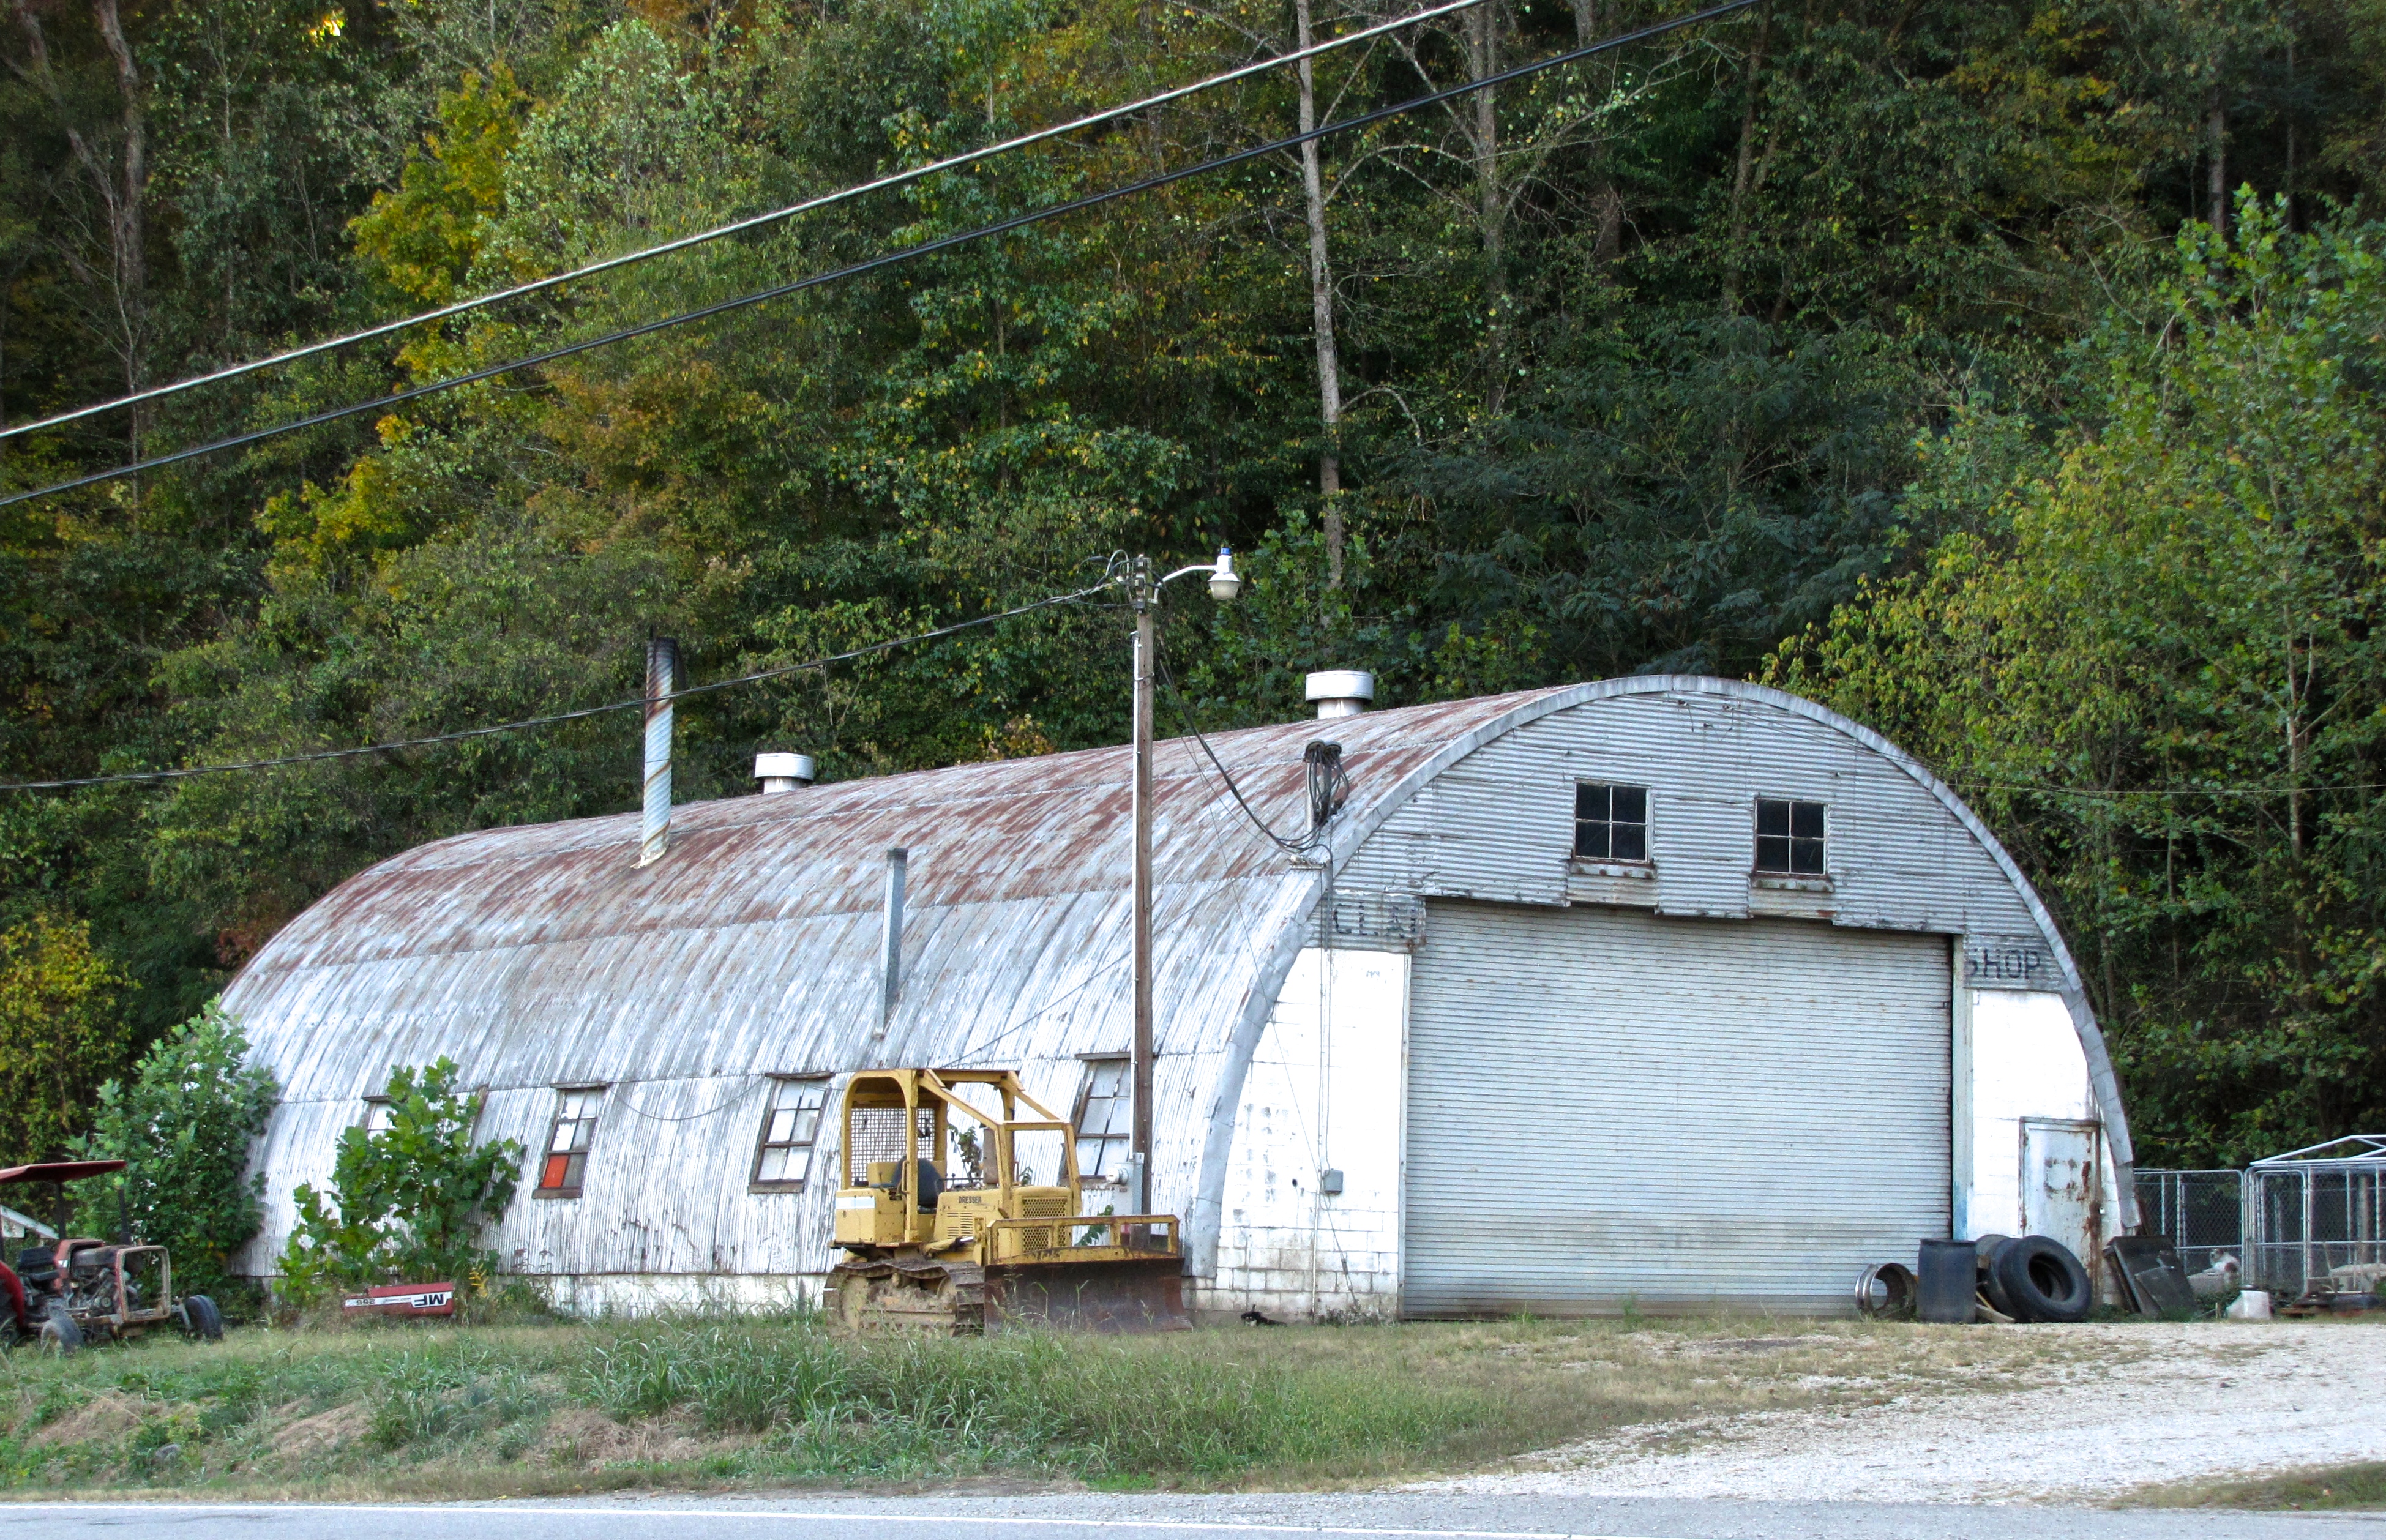 quonset hut in Privacy Policy, ME